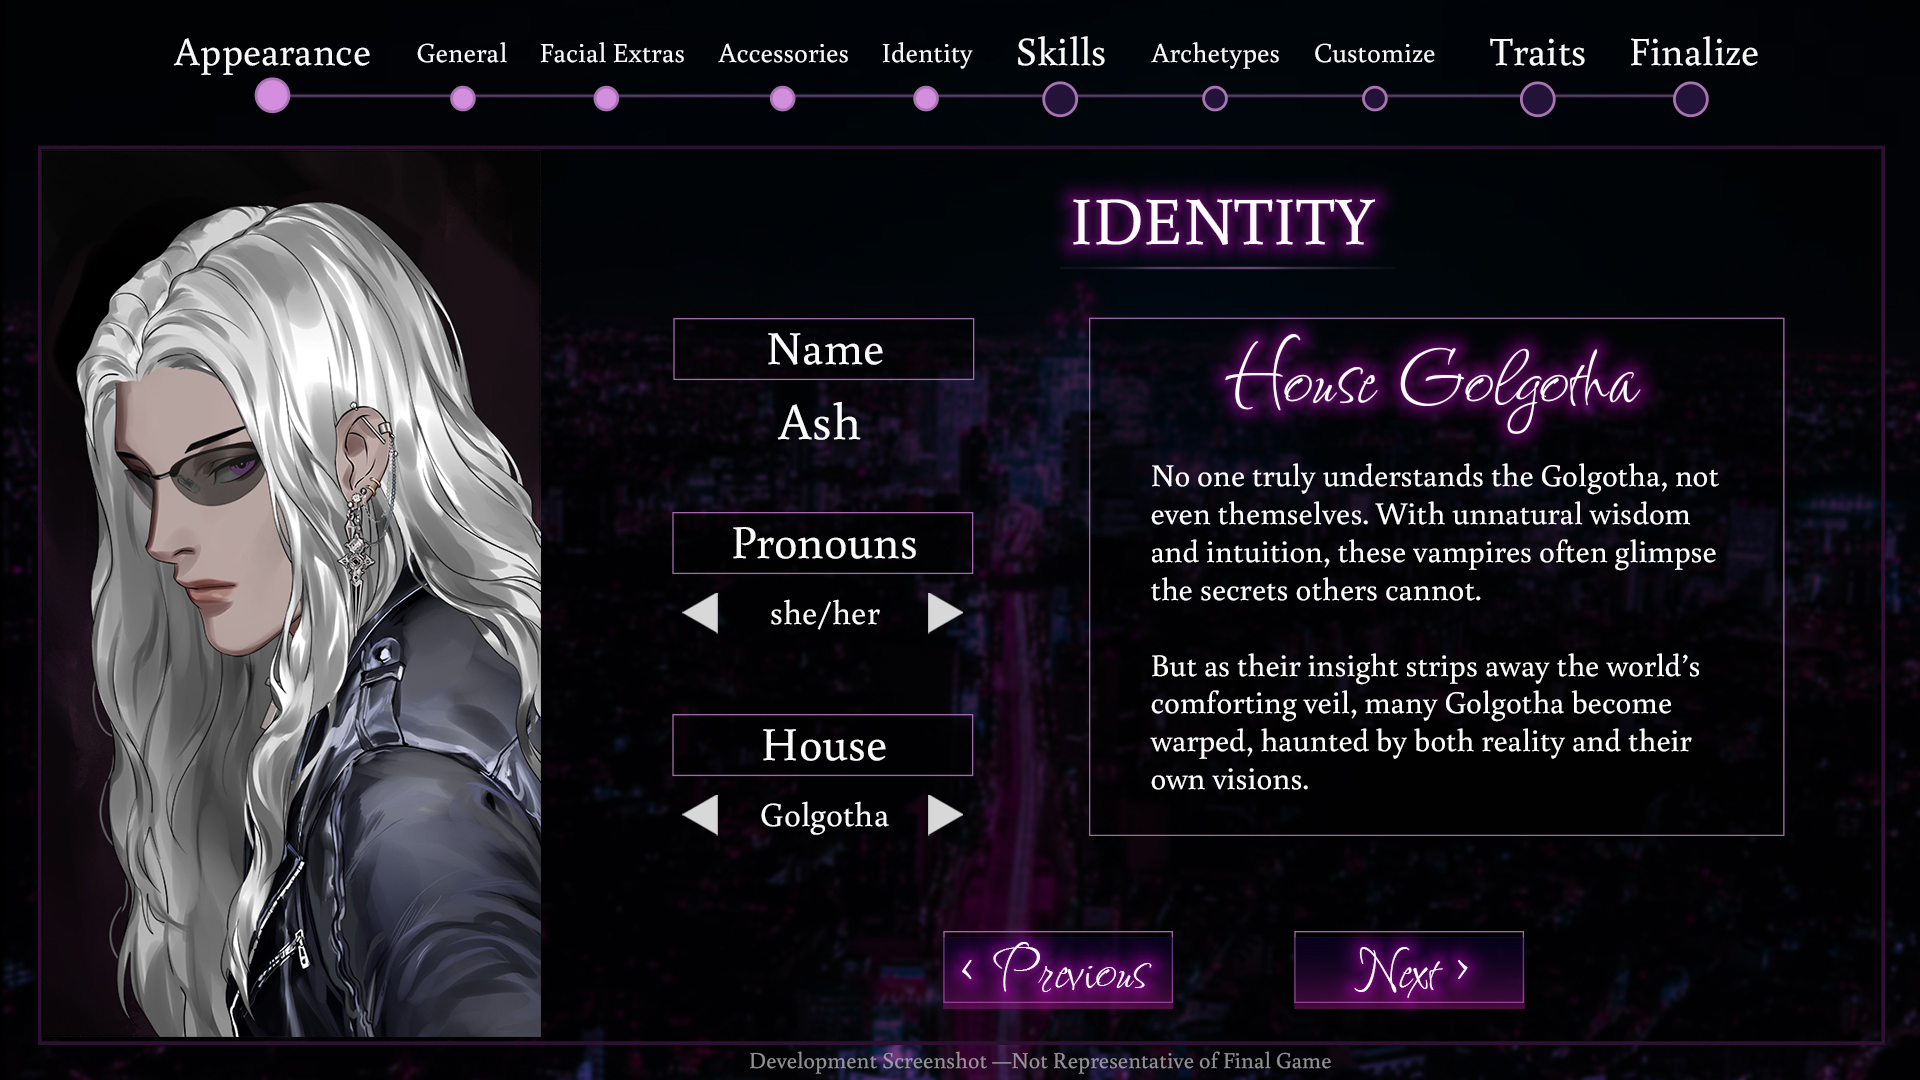 Character creation screen for name, pronouns, and House